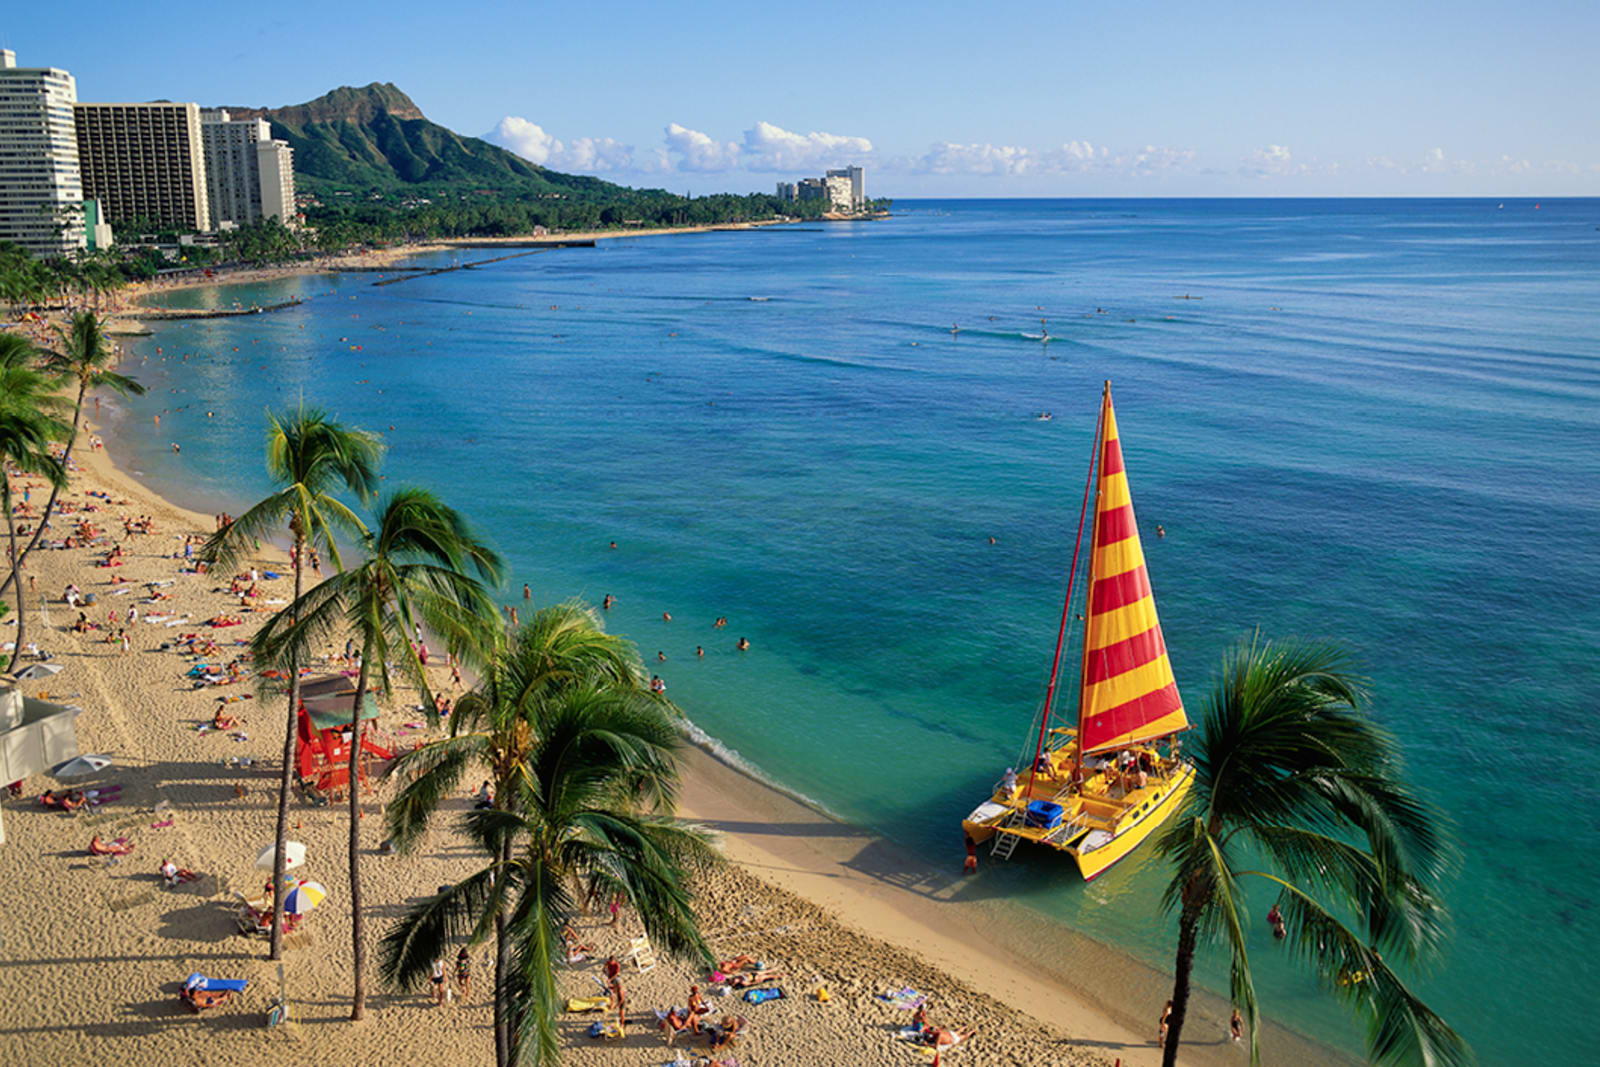 Waikiki Beach is a famous spot for surfing and other water sports